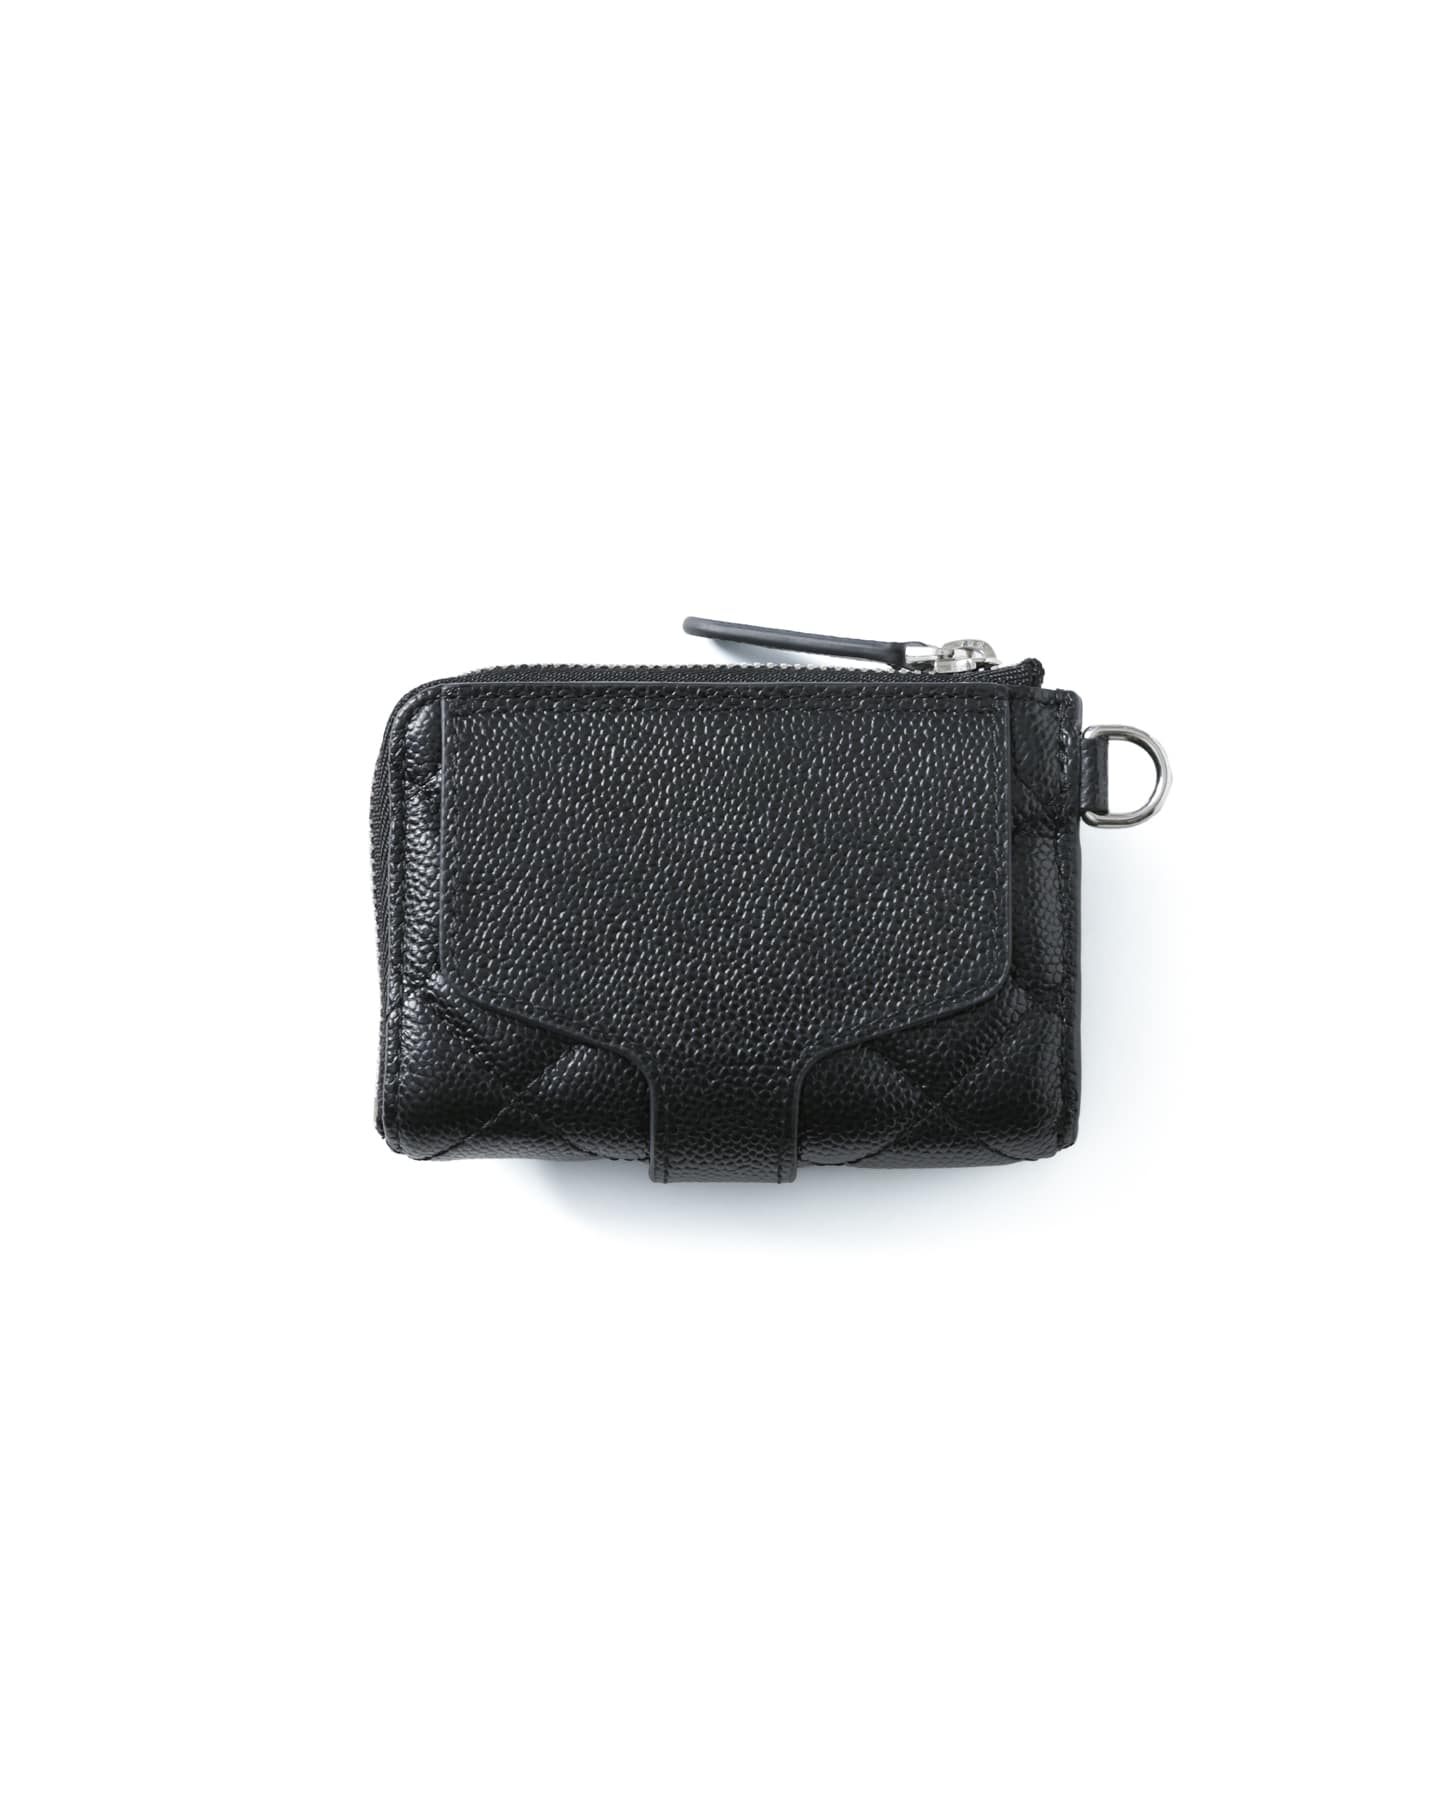 SOPH. | DEMIURVO LEATHER QUILTING COIN CASE(FREE BLACK):